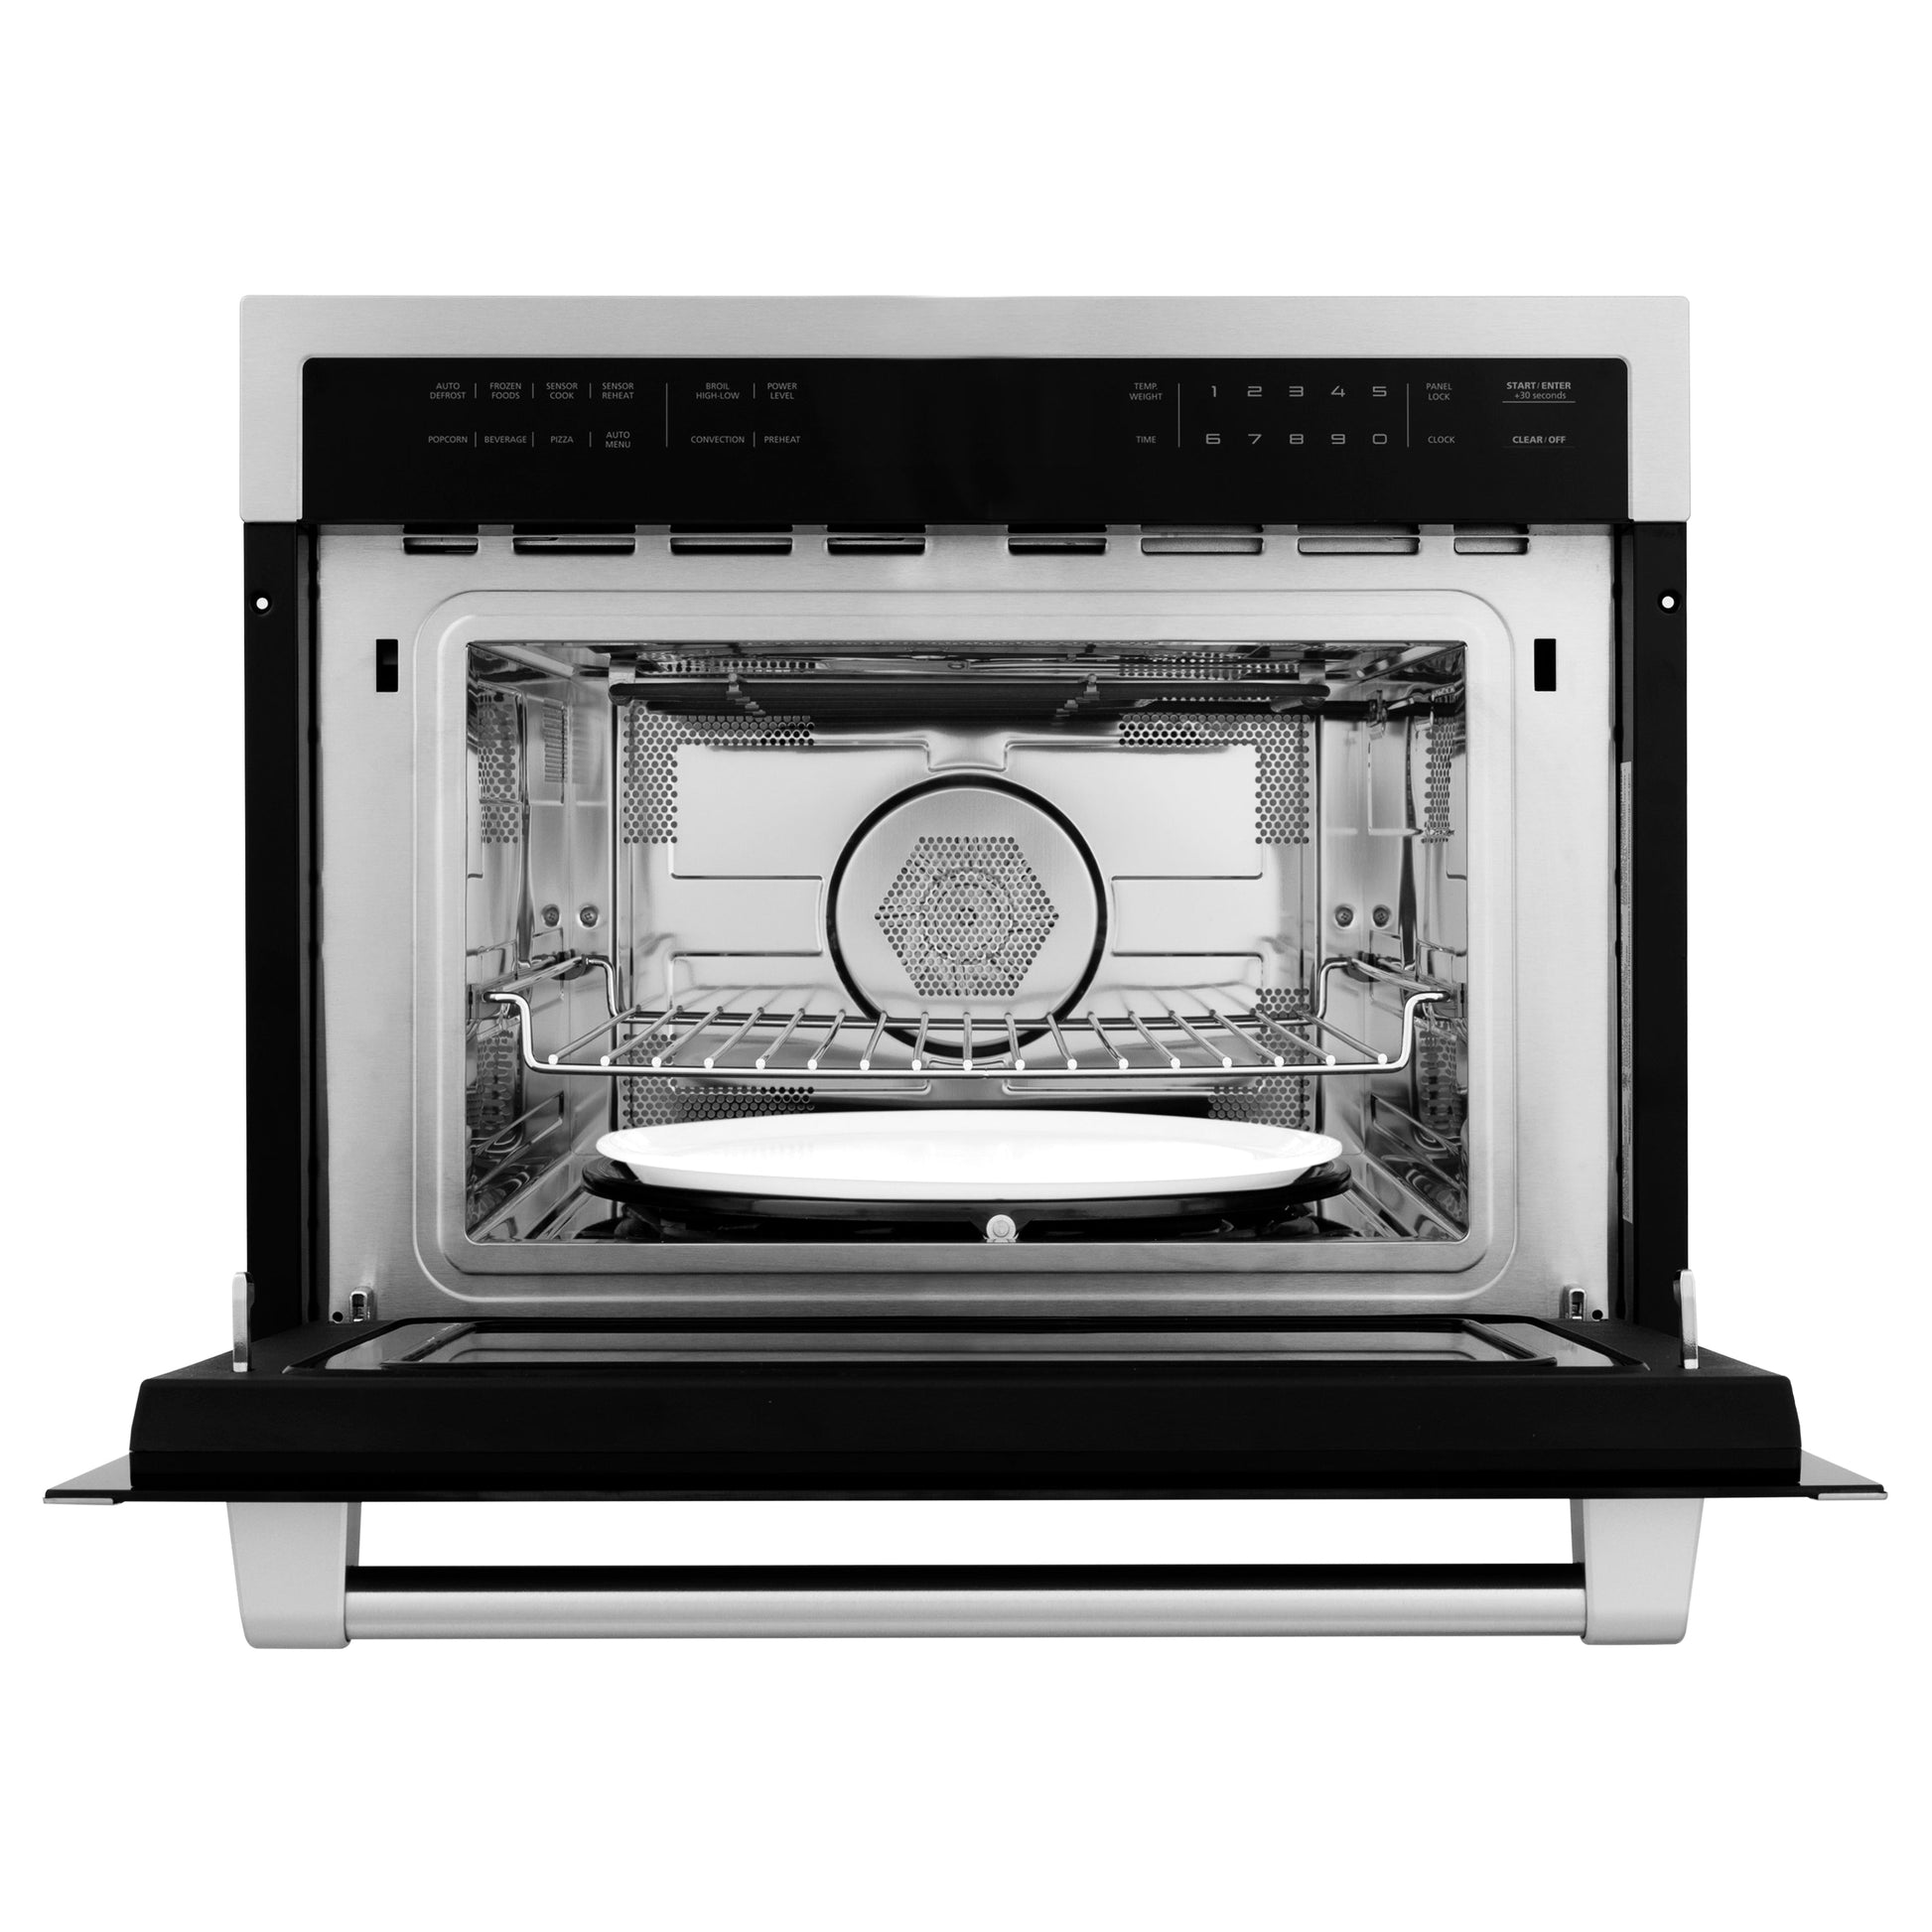 ZLINE 2-Appliance Kitchen Package with Stainless Steel 24" Built-in Convection Microwave Oven and 30" Single Wall Oven with Self Clean